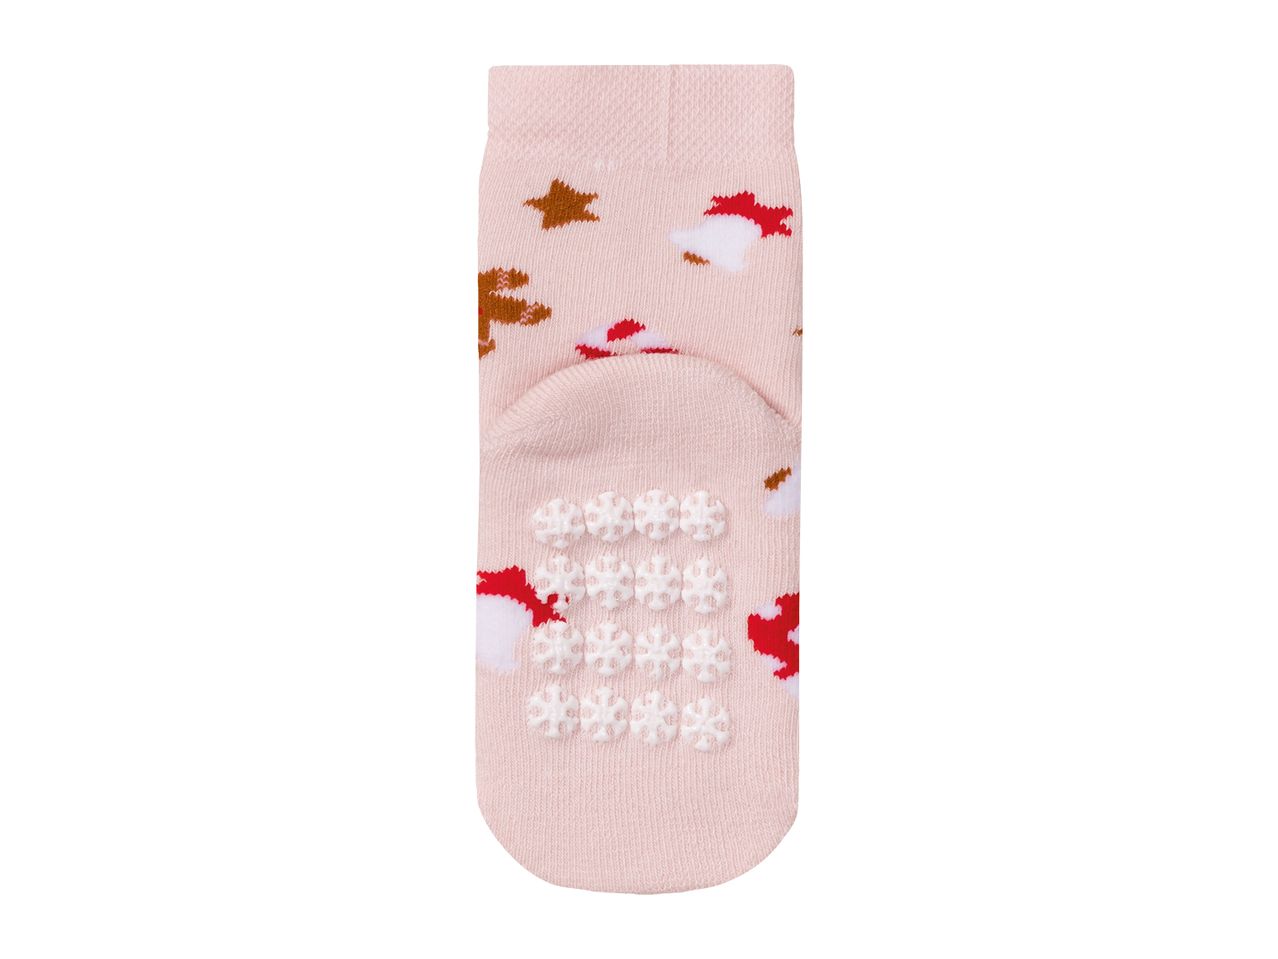 Go to full screen view: Lupilu Younger Kids’ Christmas Thermal Socks - 2 pairs - Image 3